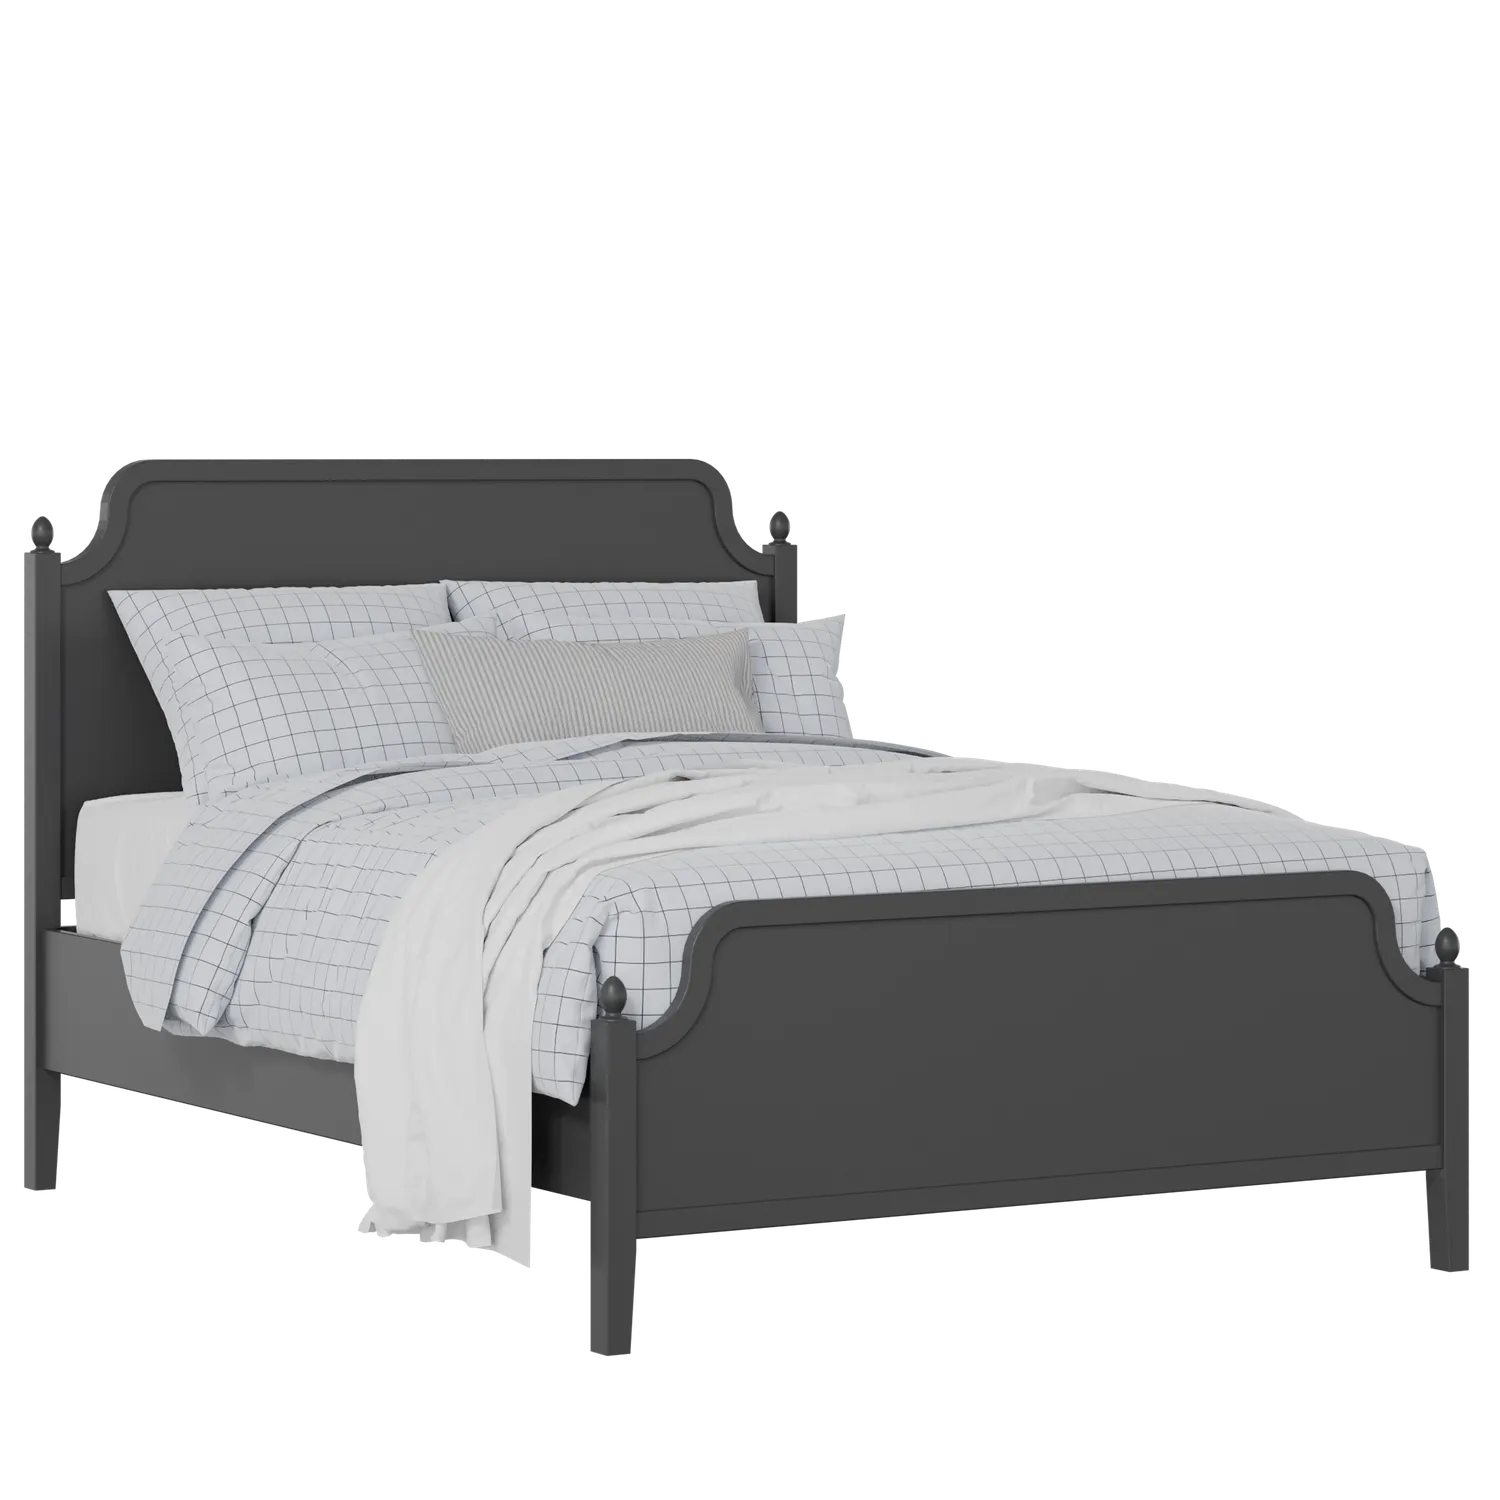 Bronte painted wood bed in black with Juno mattress